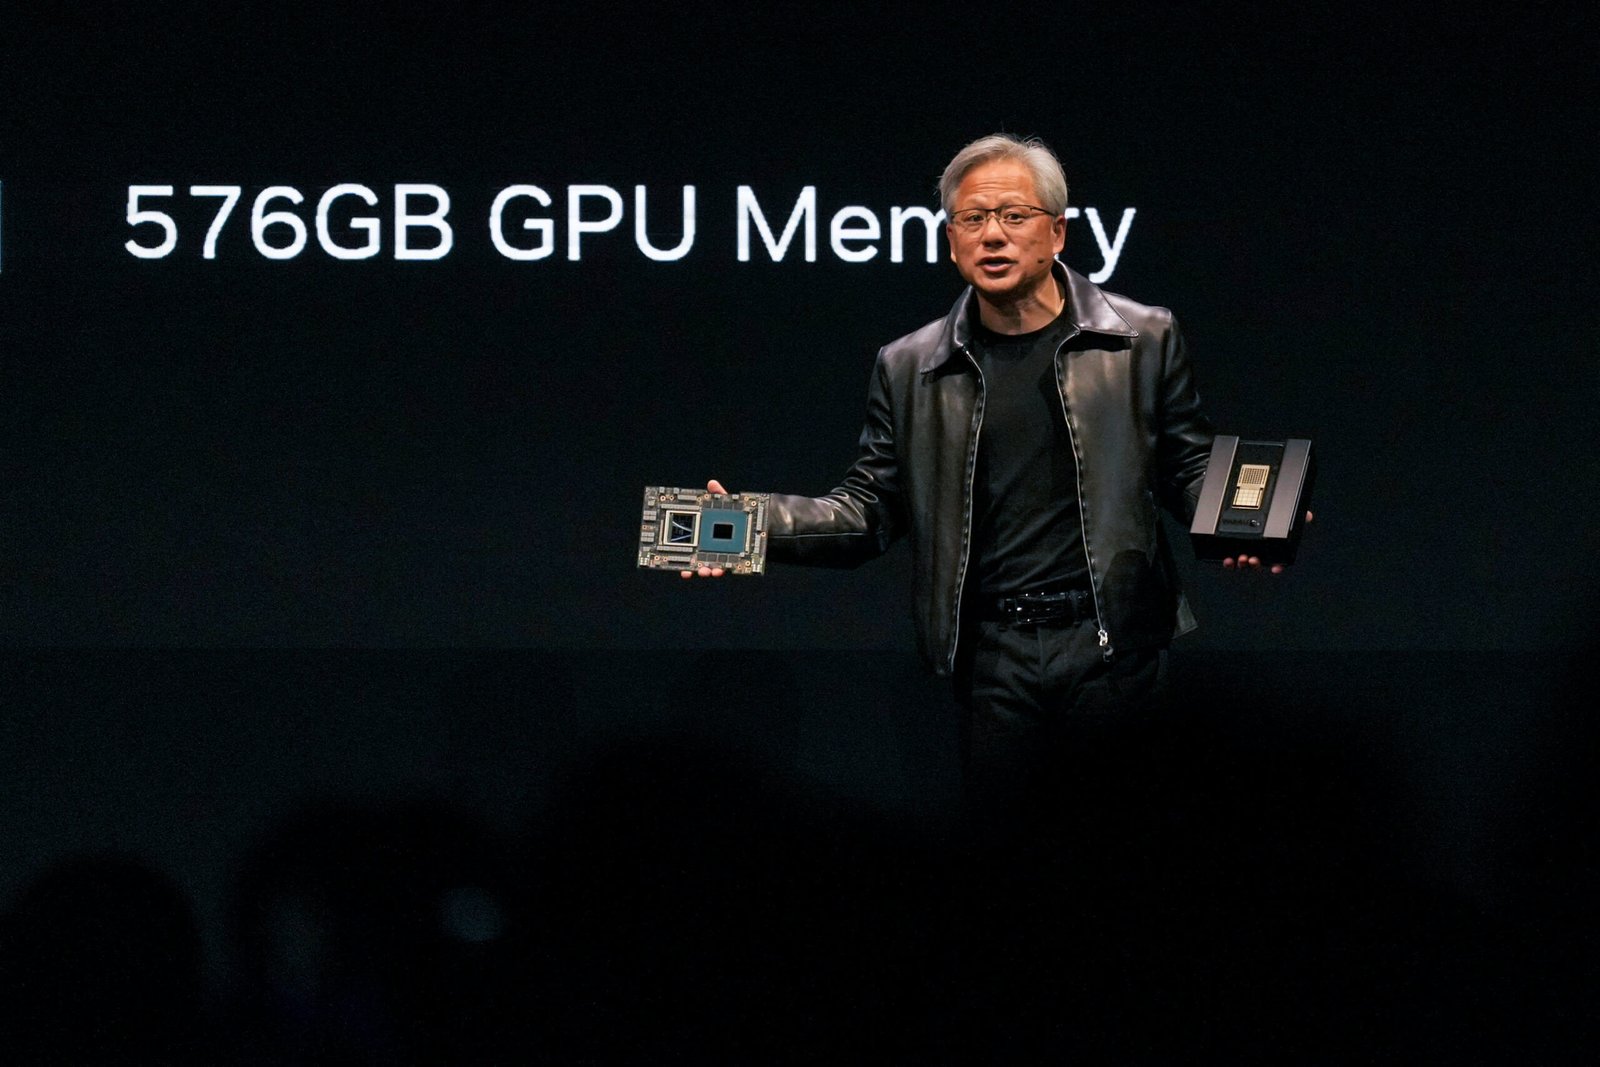 Nvidia CEO rings alarm on IT jobs, says with AI no one will require Java or C to do coding